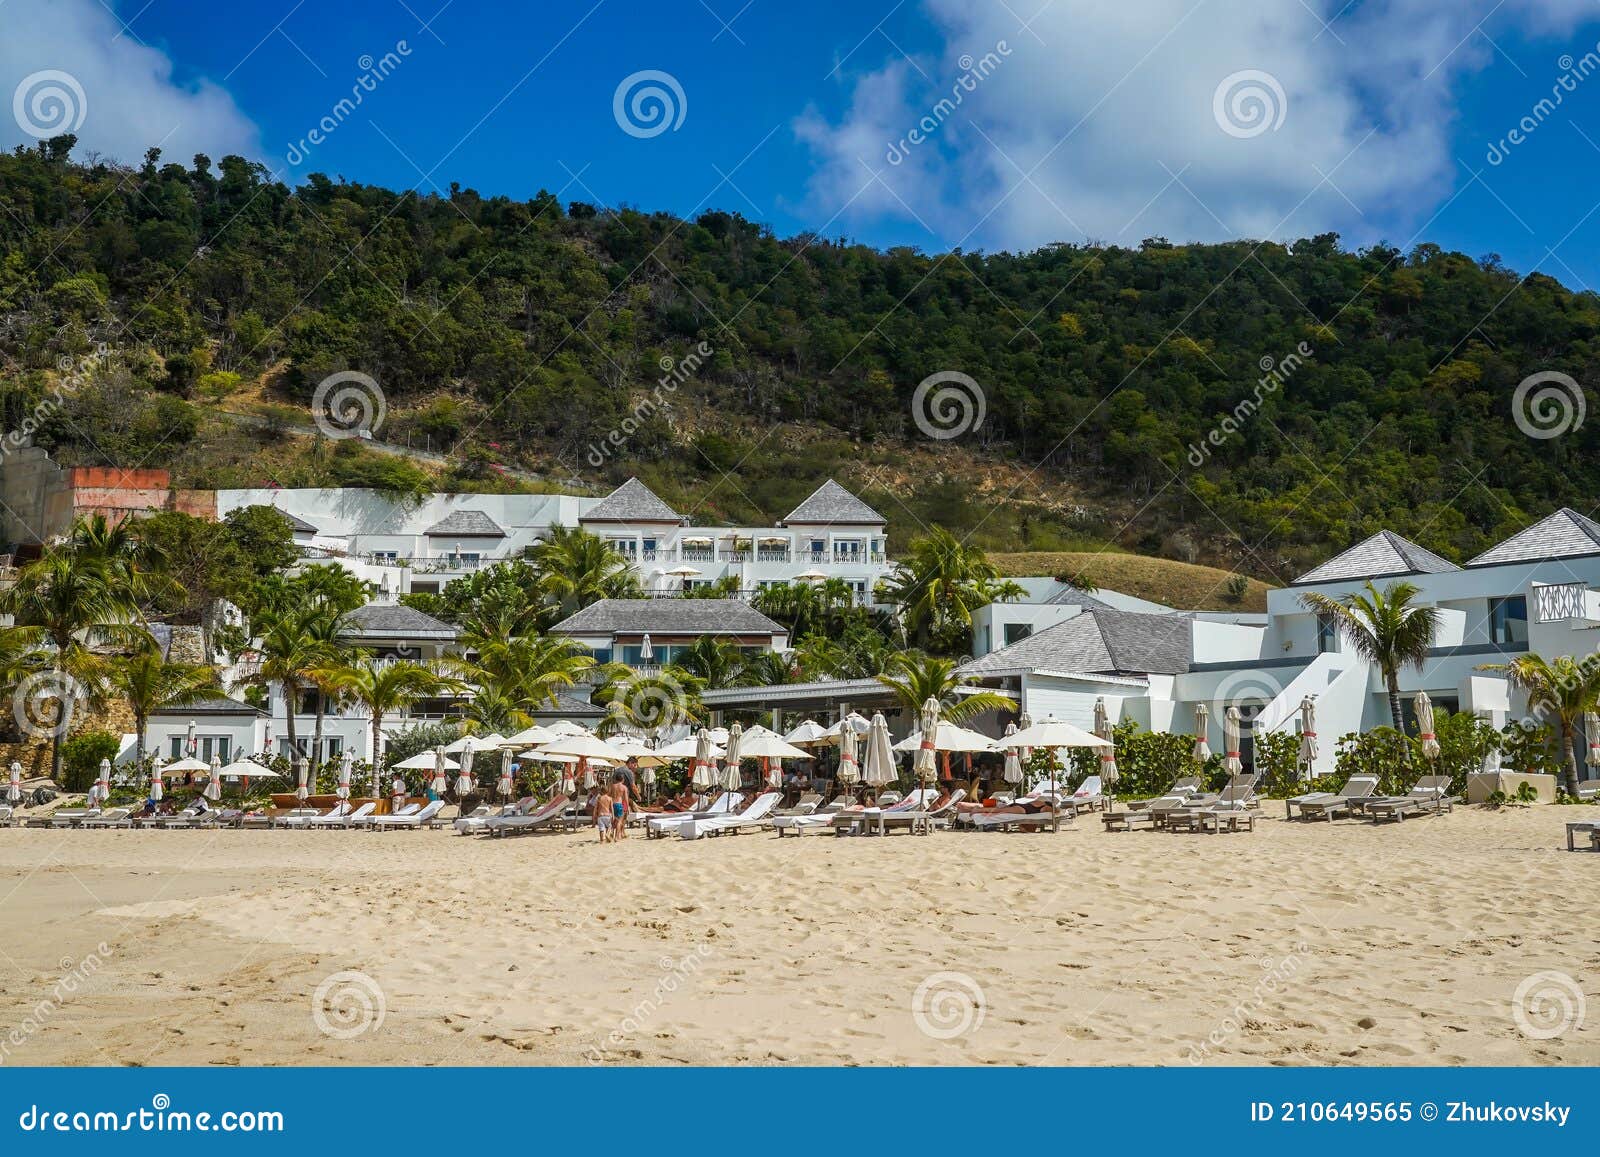 Cheval Blanc St-Barth Isle De France Hotel at Flamands Beach on the Island  of Saint Barthelemy Editorial Image - Image of resort, barthelemy: 210649565